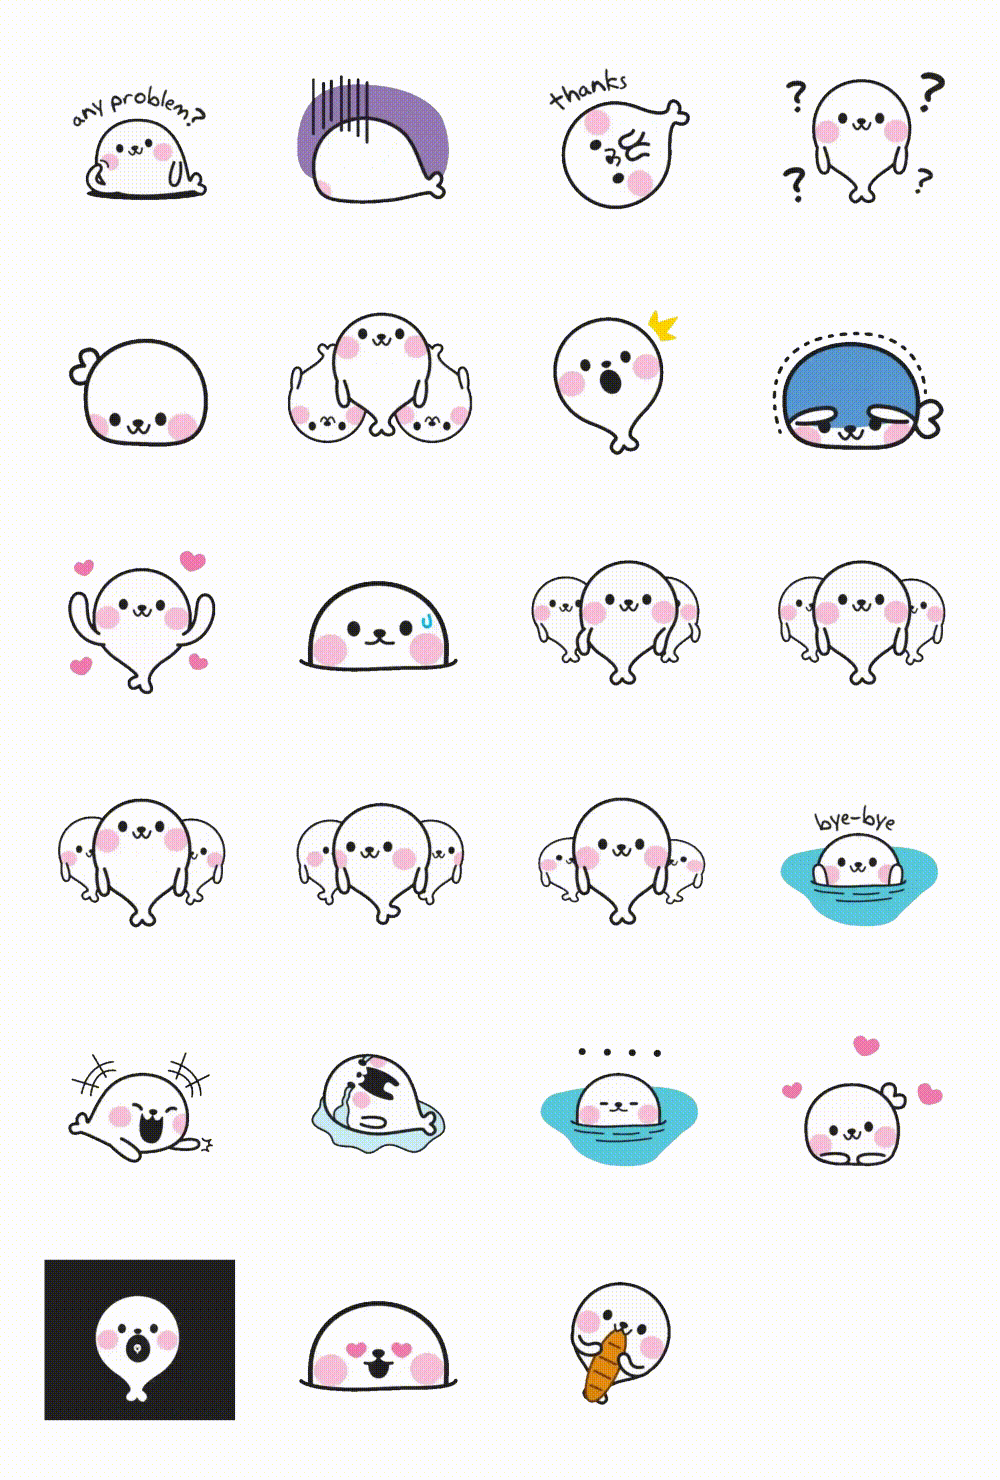 Cute White Seal Animation/Cartoon,Animals sticker pack for Whatsapp, Telegram, Signal, and others chatting and message apps